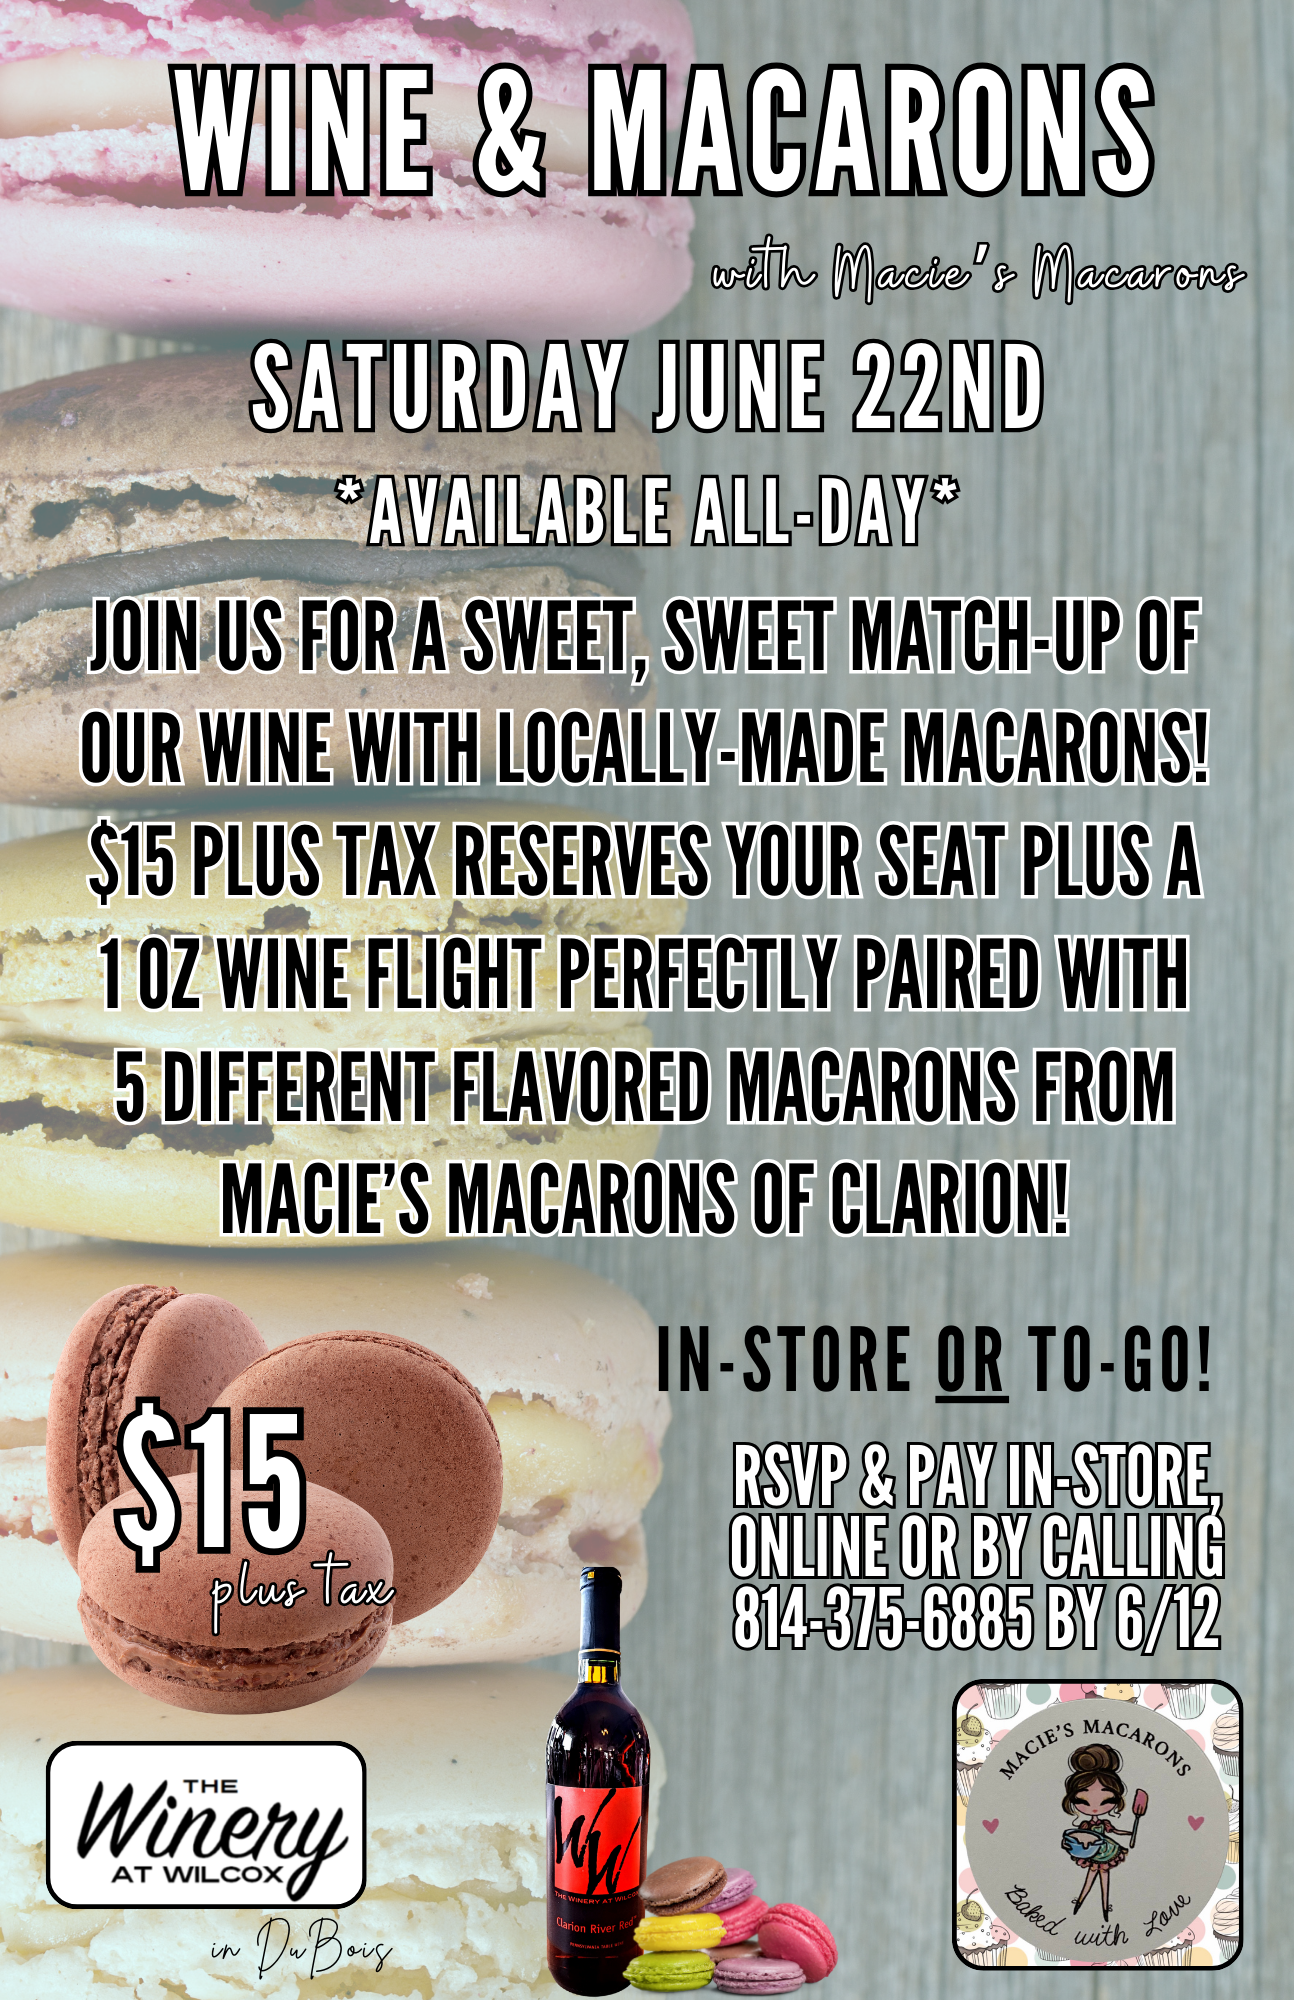 Wine & Macarons - DuBois - The Winery at Wilcox